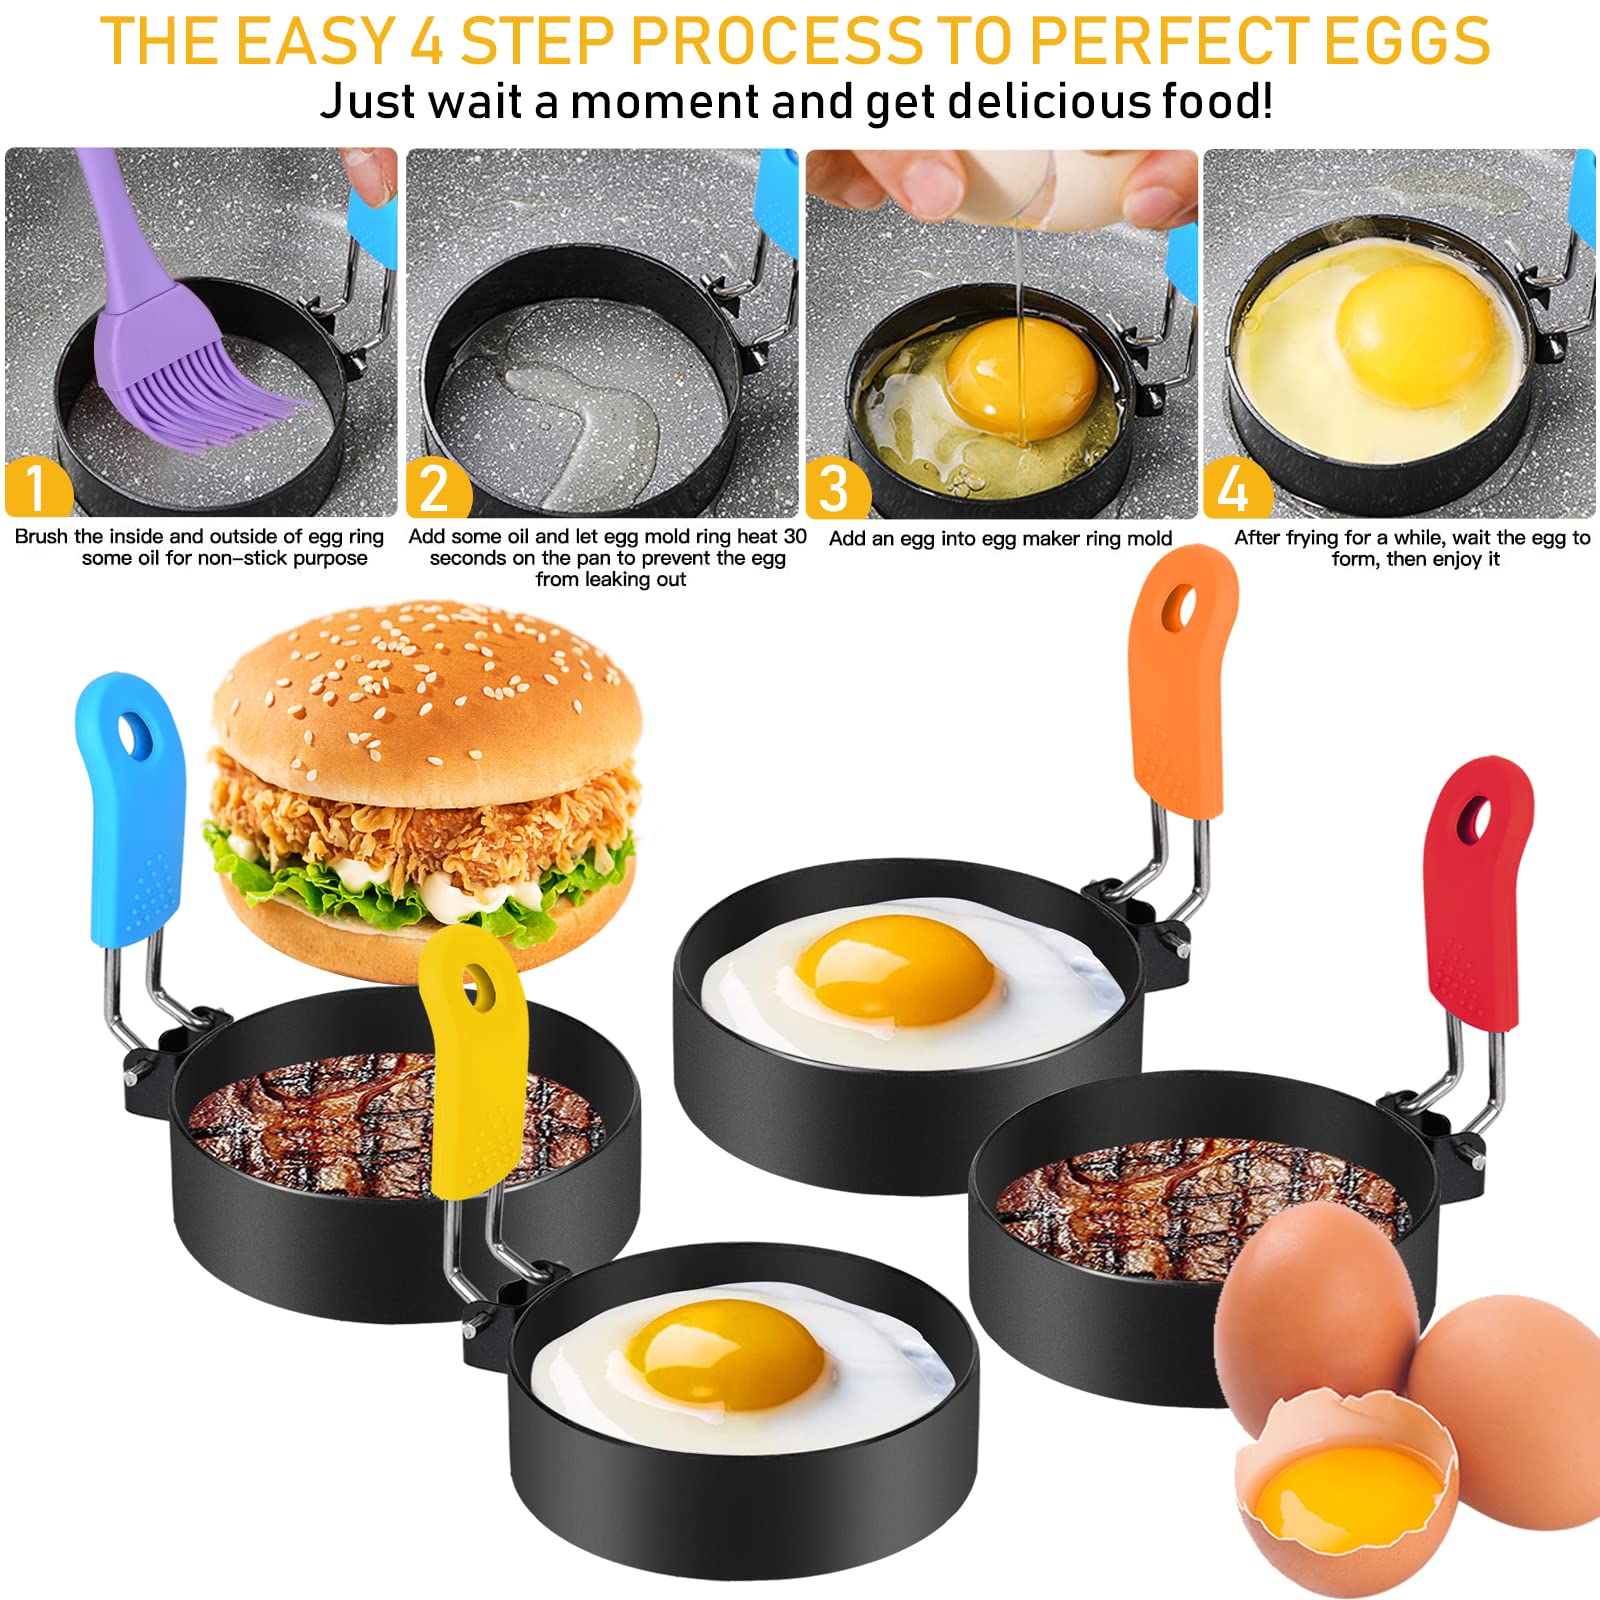 Stainless Steel Nonstick Egg Rings, Oil Brush, Silicone Spatula, Round Frying Eggs Pancake Mold with Anti-scald Handle, for Camping Breakfast Sandwich Burger Fried Eggs English Muffins - 6 Pack